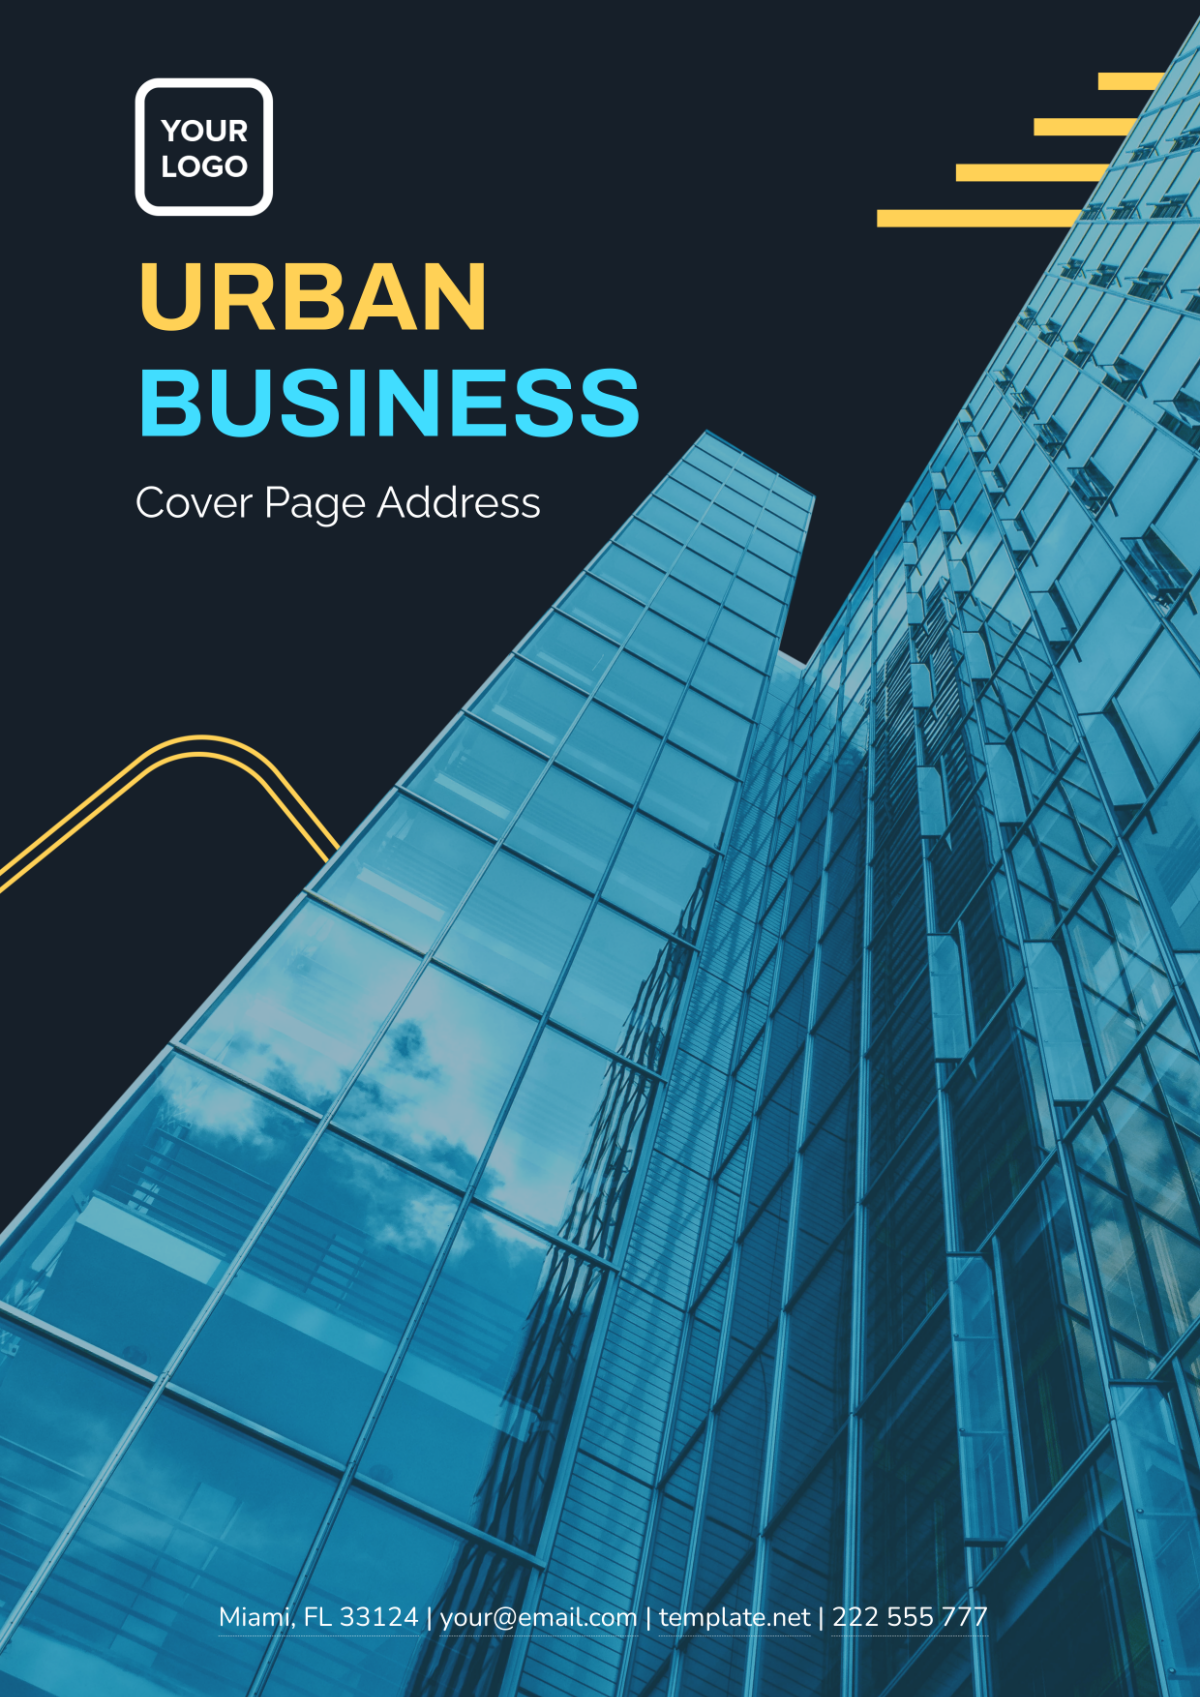 Urban Business Cover Page Address